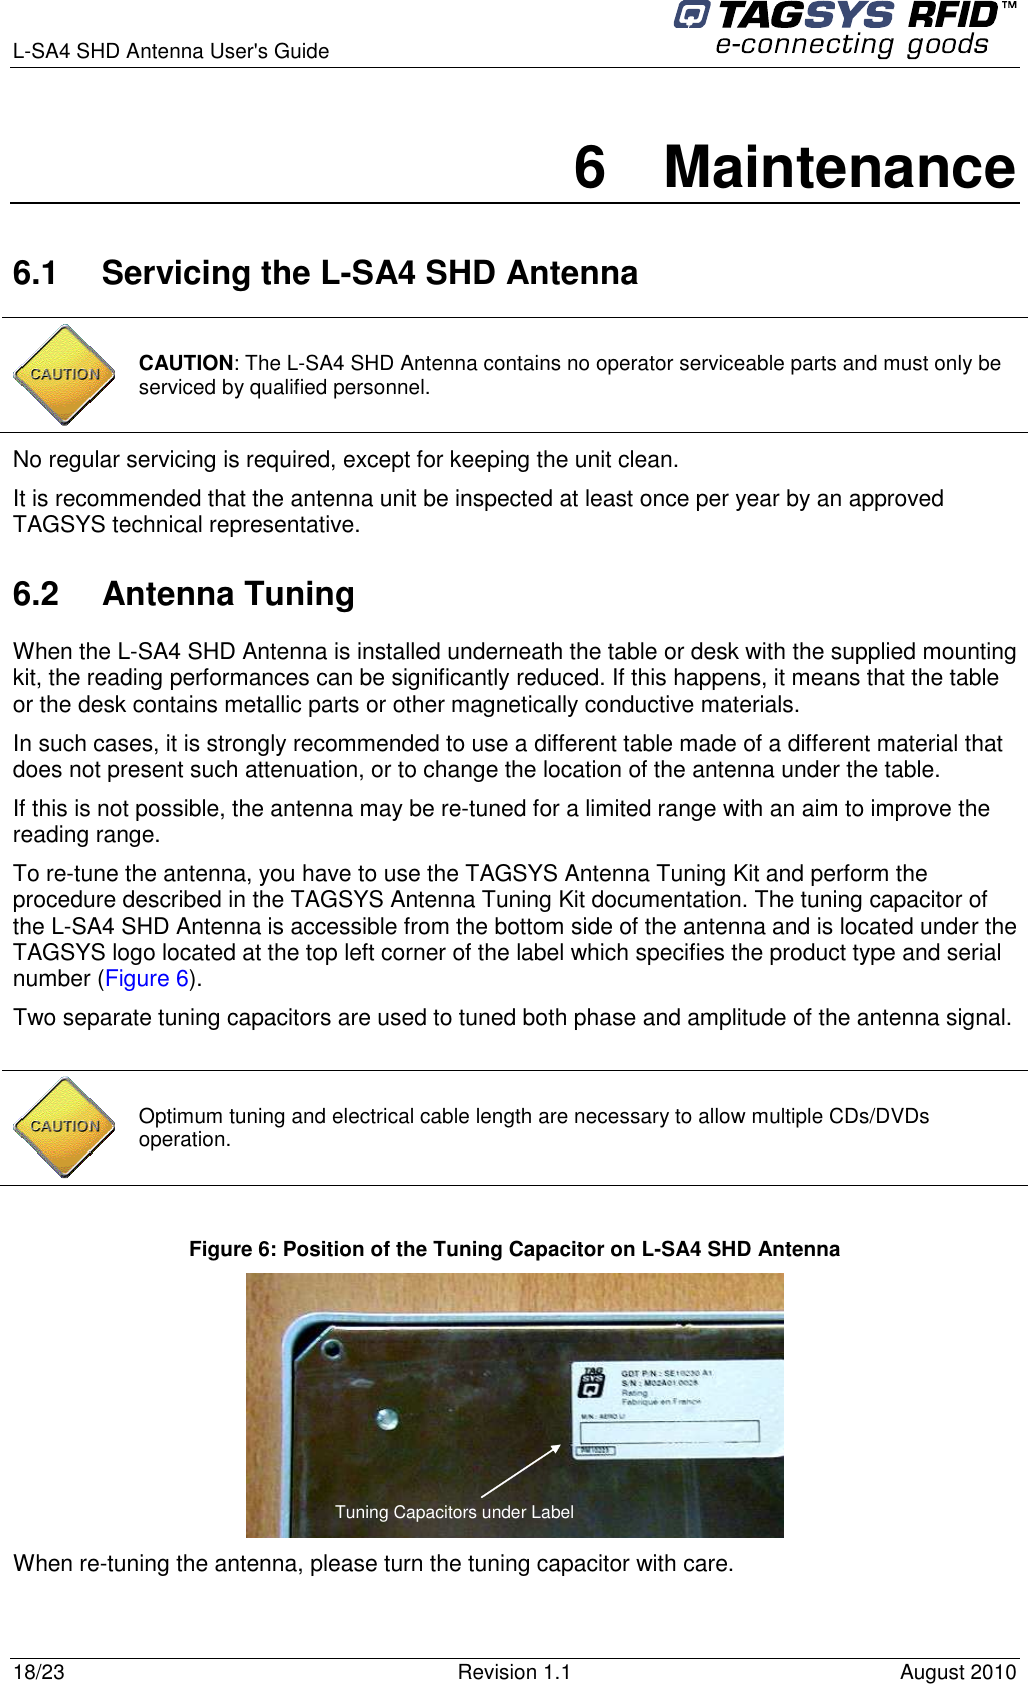  L-SA4 SHD Antenna User&apos;s Guide     18/23  Revision 1.1  August 2010 6  Maintenance 6.1  Servicing the L-SA4 SHD Antenna  CAUTION: The L-SA4 SHD Antenna contains no operator serviceable parts and must only be serviced by qualified personnel.  No regular servicing is required, except for keeping the unit clean.  It is recommended that the antenna unit be inspected at least once per year by an approved TAGSYS technical representative. 6.2  Antenna Tuning When the L-SA4 SHD Antenna is installed underneath the table or desk with the supplied mounting kit, the reading performances can be significantly reduced. If this happens, it means that the table or the desk contains metallic parts or other magnetically conductive materials. In such cases, it is strongly recommended to use a different table made of a different material that does not present such attenuation, or to change the location of the antenna under the table. If this is not possible, the antenna may be re-tuned for a limited range with an aim to improve the reading range. To re-tune the antenna, you have to use the TAGSYS Antenna Tuning Kit and perform the procedure described in the TAGSYS Antenna Tuning Kit documentation. The tuning capacitor of the L-SA4 SHD Antenna is accessible from the bottom side of the antenna and is located under the TAGSYS logo located at the top left corner of the label which specifies the product type and serial number (Figure 6). Two separate tuning capacitors are used to tuned both phase and amplitude of the antenna signal.   Optimum tuning and electrical cable length are necessary to allow multiple CDs/DVDs operation.  Figure 6: Position of the Tuning Capacitor on L-SA4 SHD Antenna  Tuning Capacitors under Label  When re-tuning the antenna, please turn the tuning capacitor with care. 